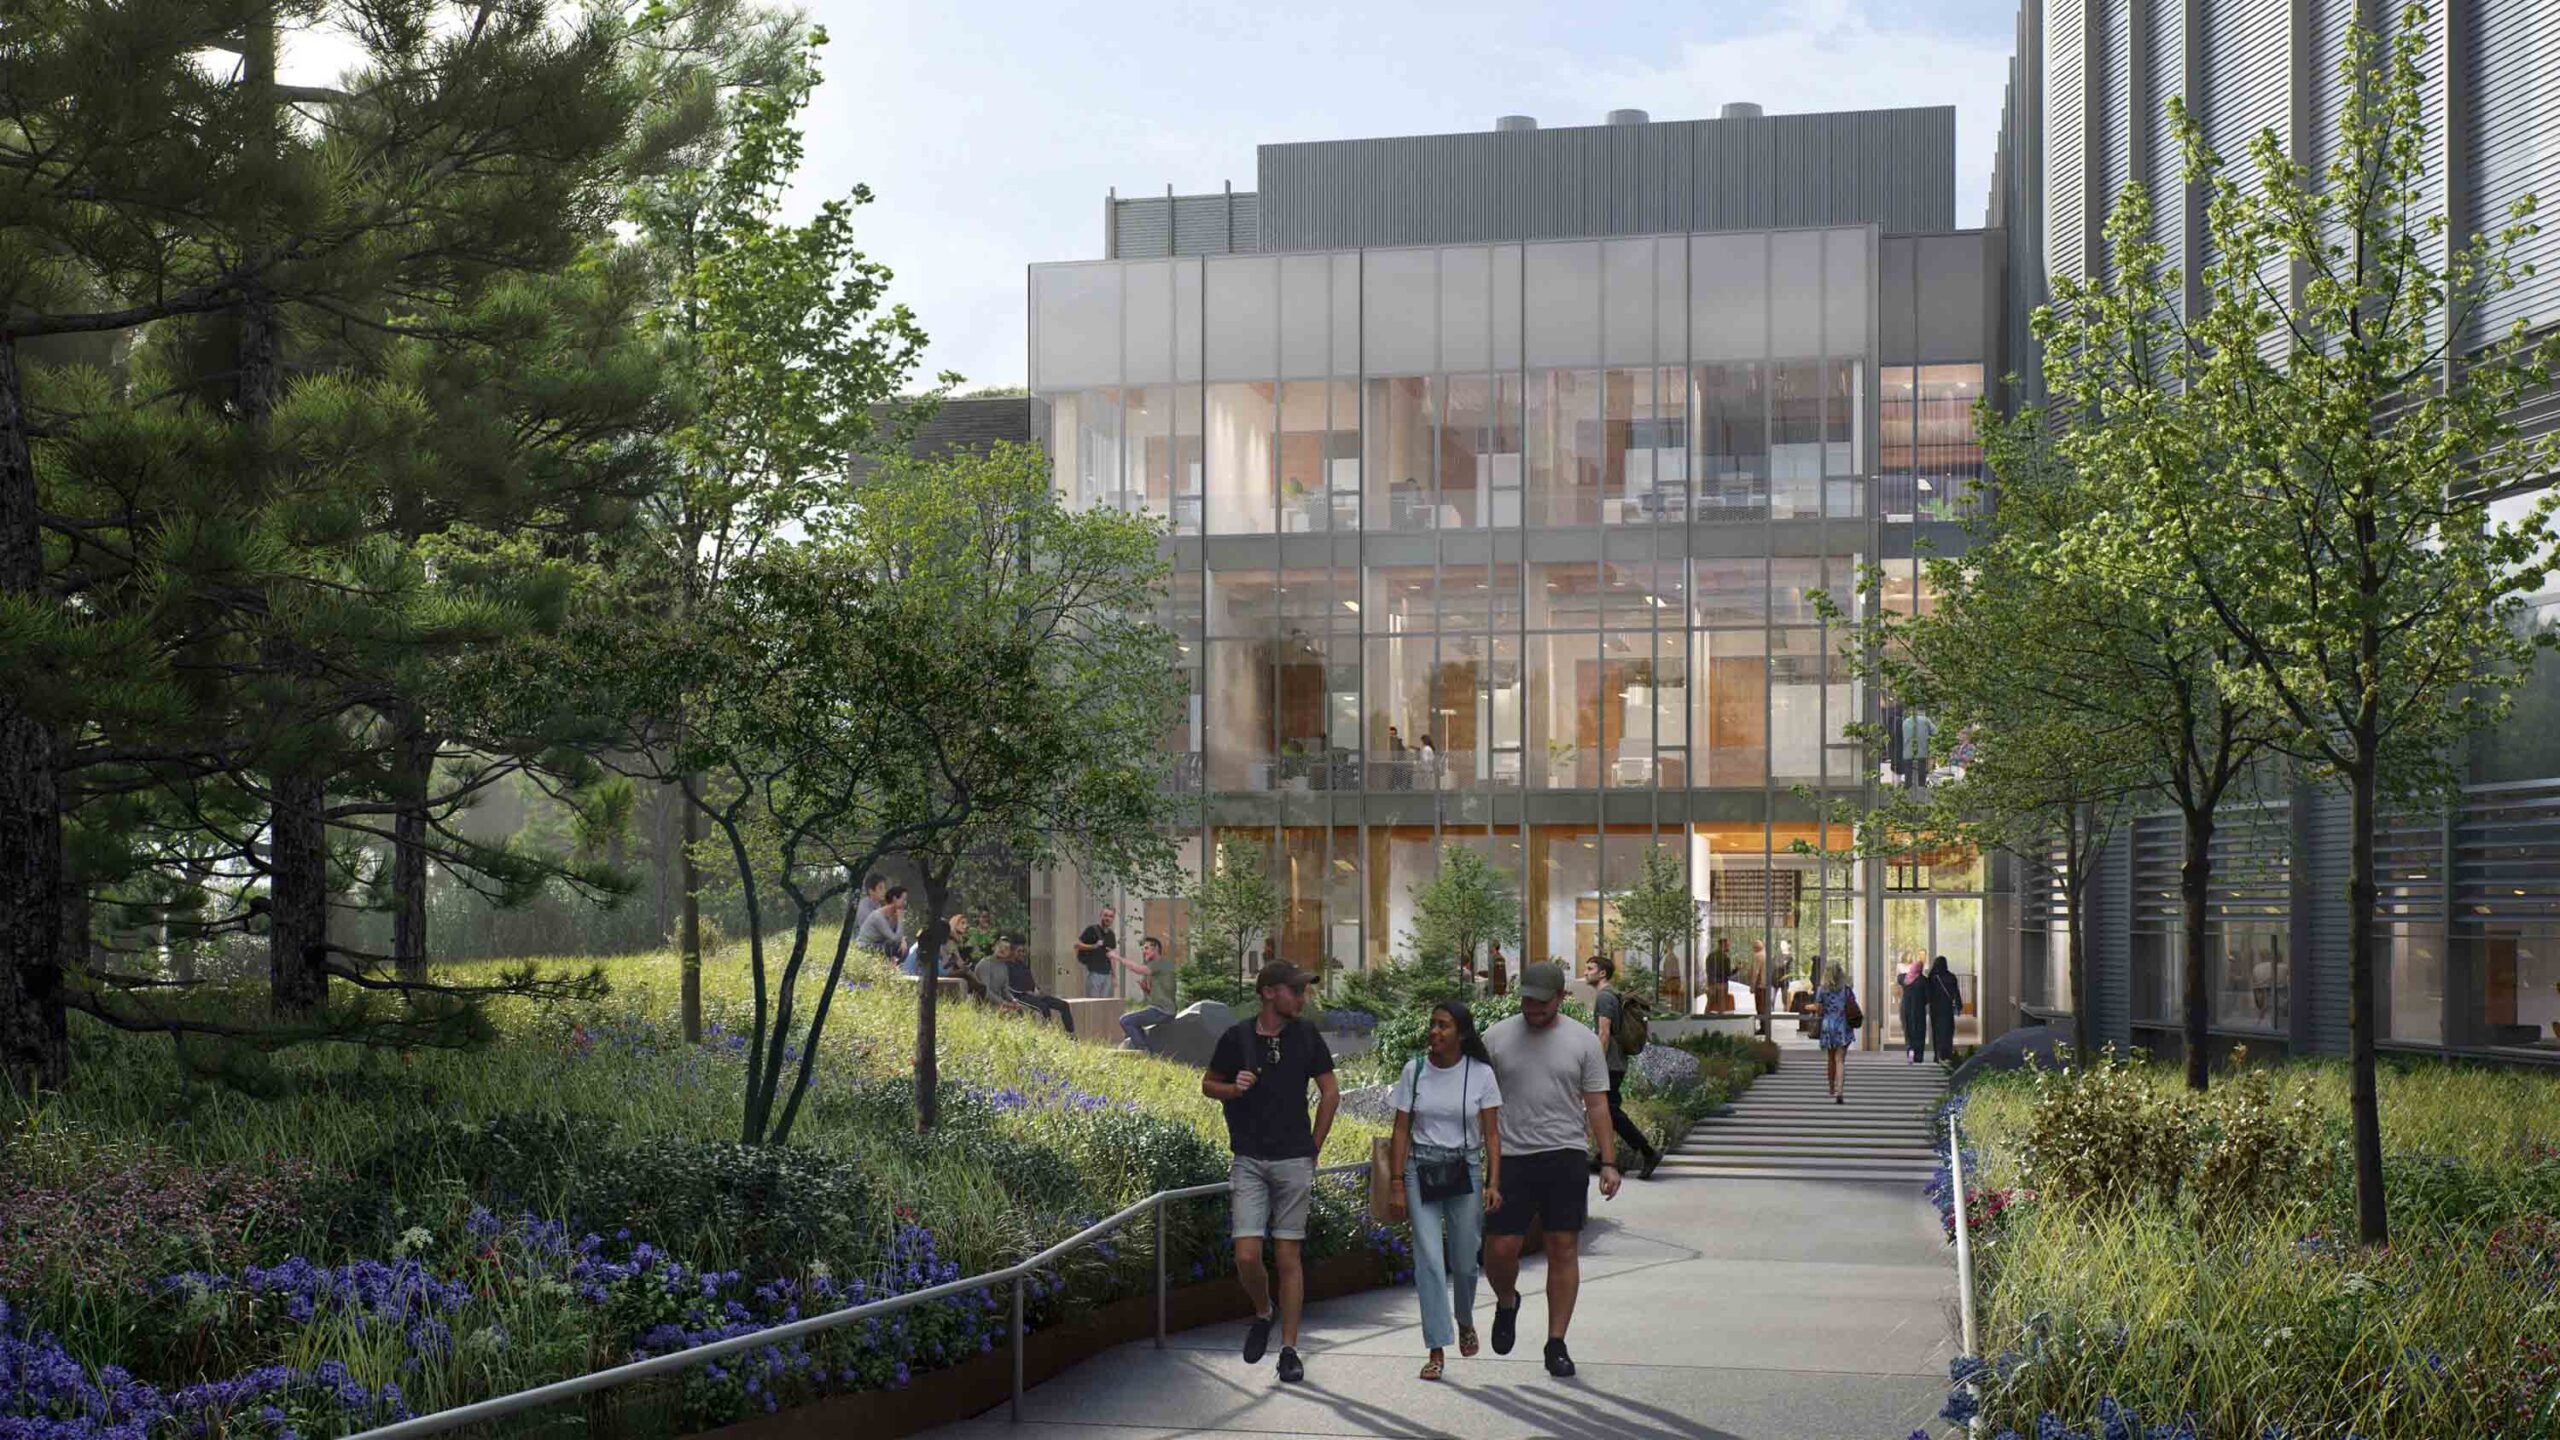 Rendering of new engineering building. People are walking on sidewalk in front of building with lots of glass windows. It appears to be just before dusk.